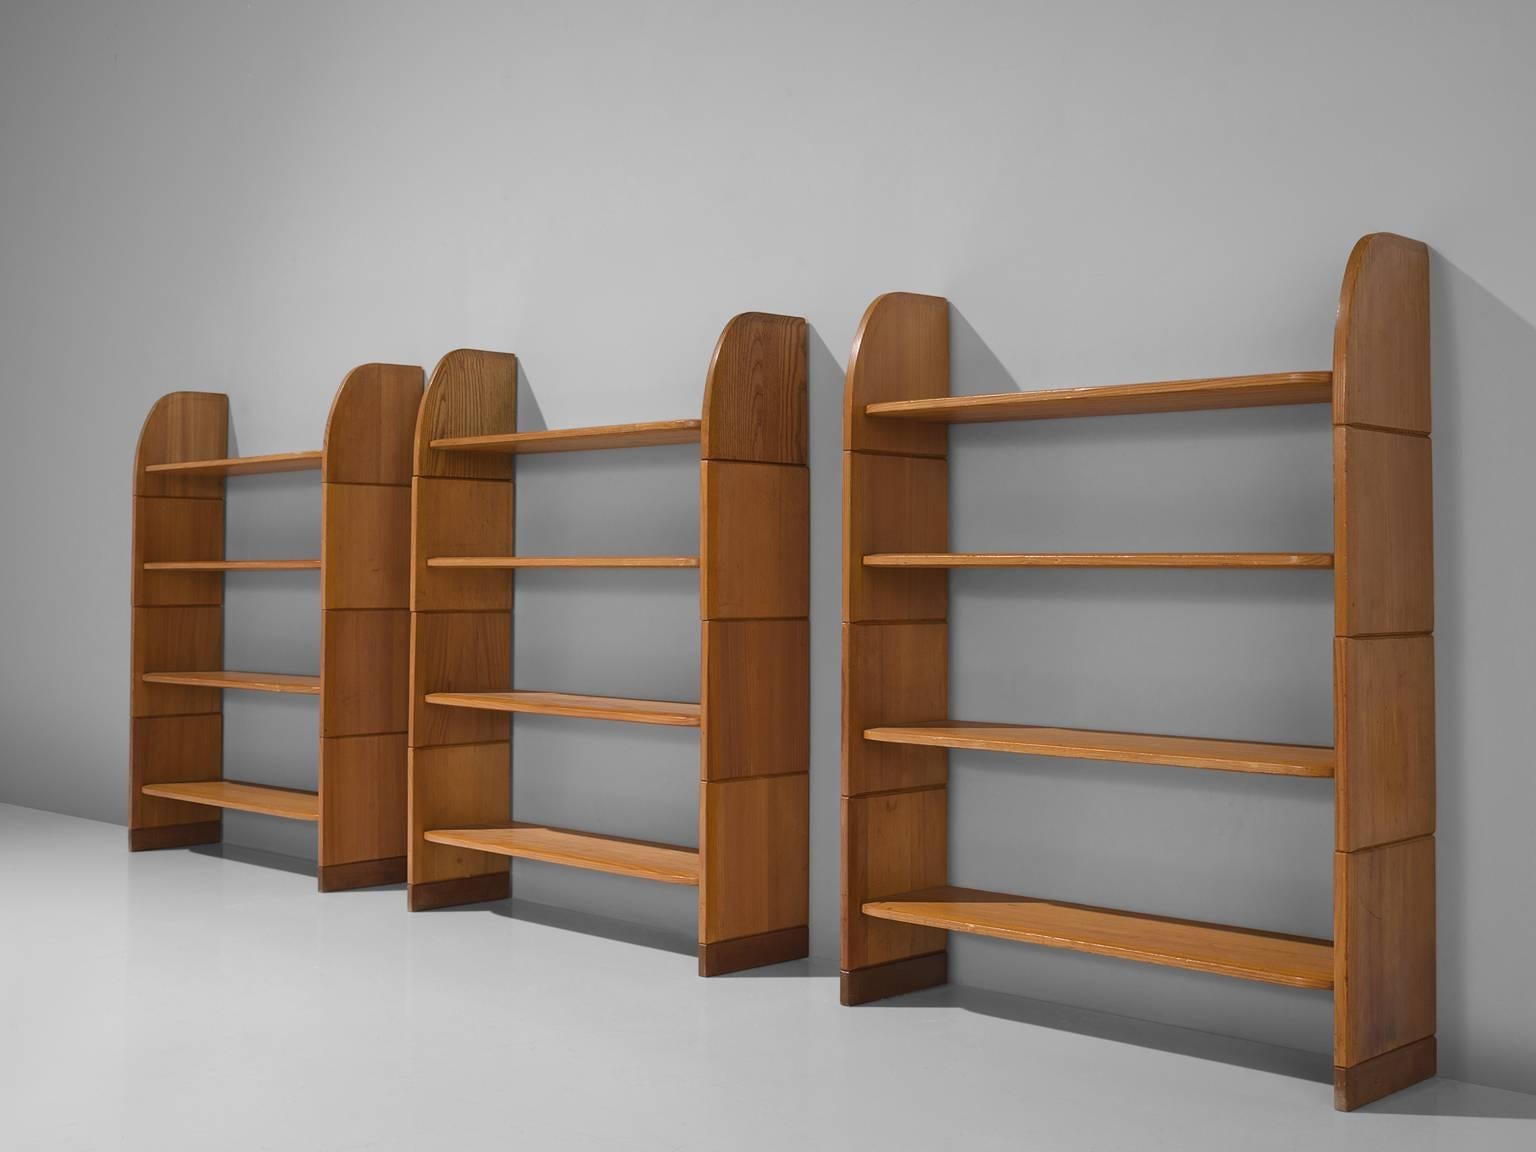 Arthur Milani, bookshelves, solid pine, Swiss, 1947.

This set of three solid pine bookcases have a nice simplified yet elegant design. The pine planks on each side become smaller towards the top giving the shelves a less geometric feel. Each unit